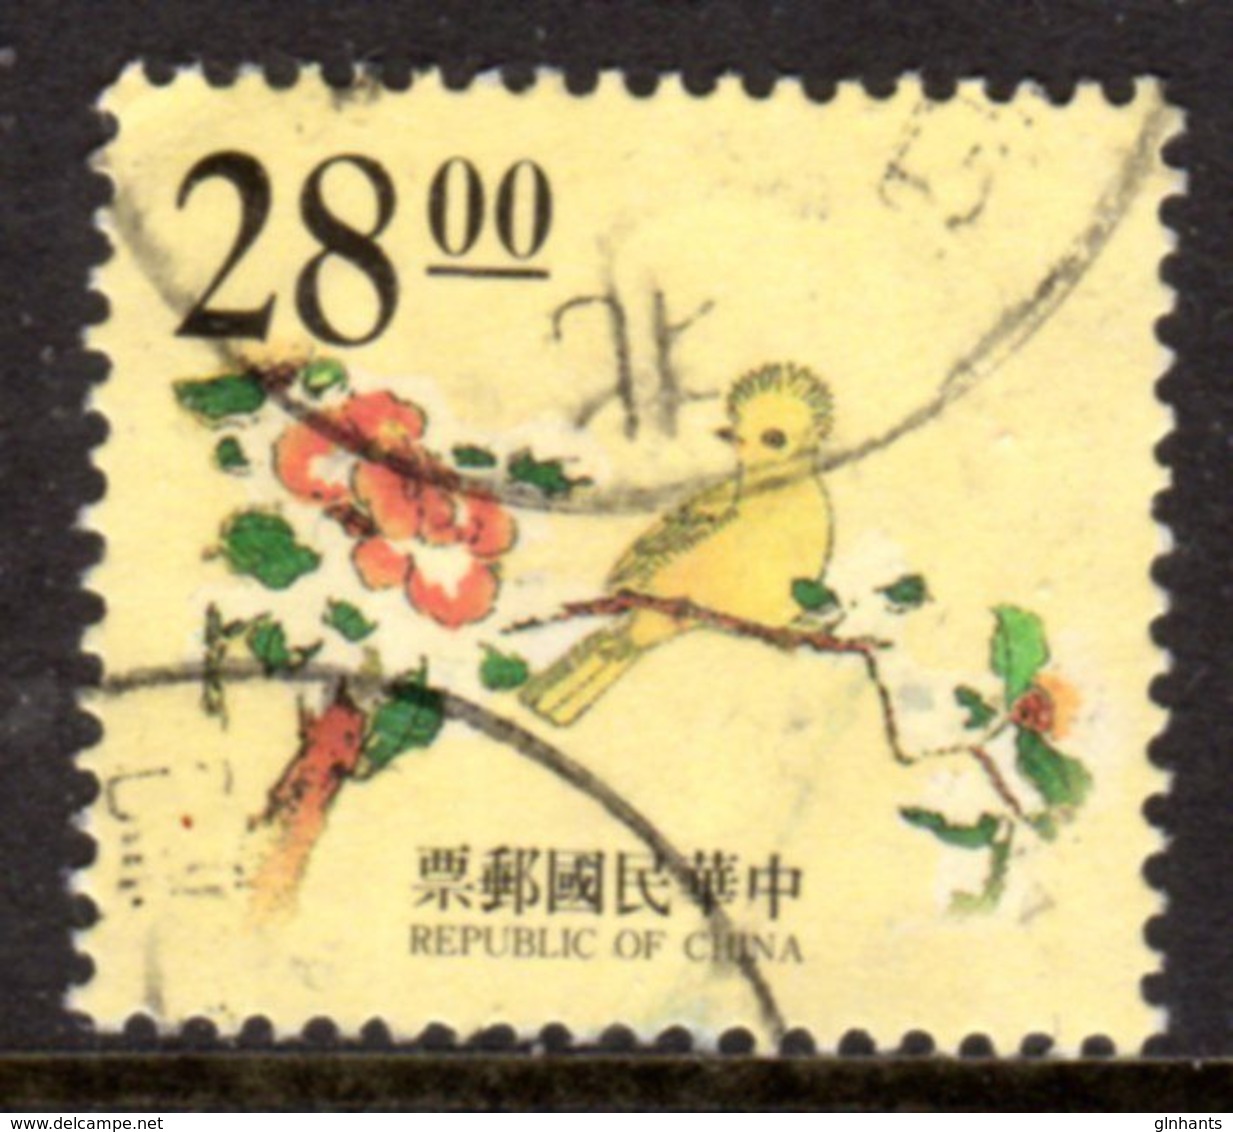 TAIWAN ROC - 1995 ENGRAVINGS YELLOW BIRDS $28 STAMP FINE USED SG 2267 - Gebraucht